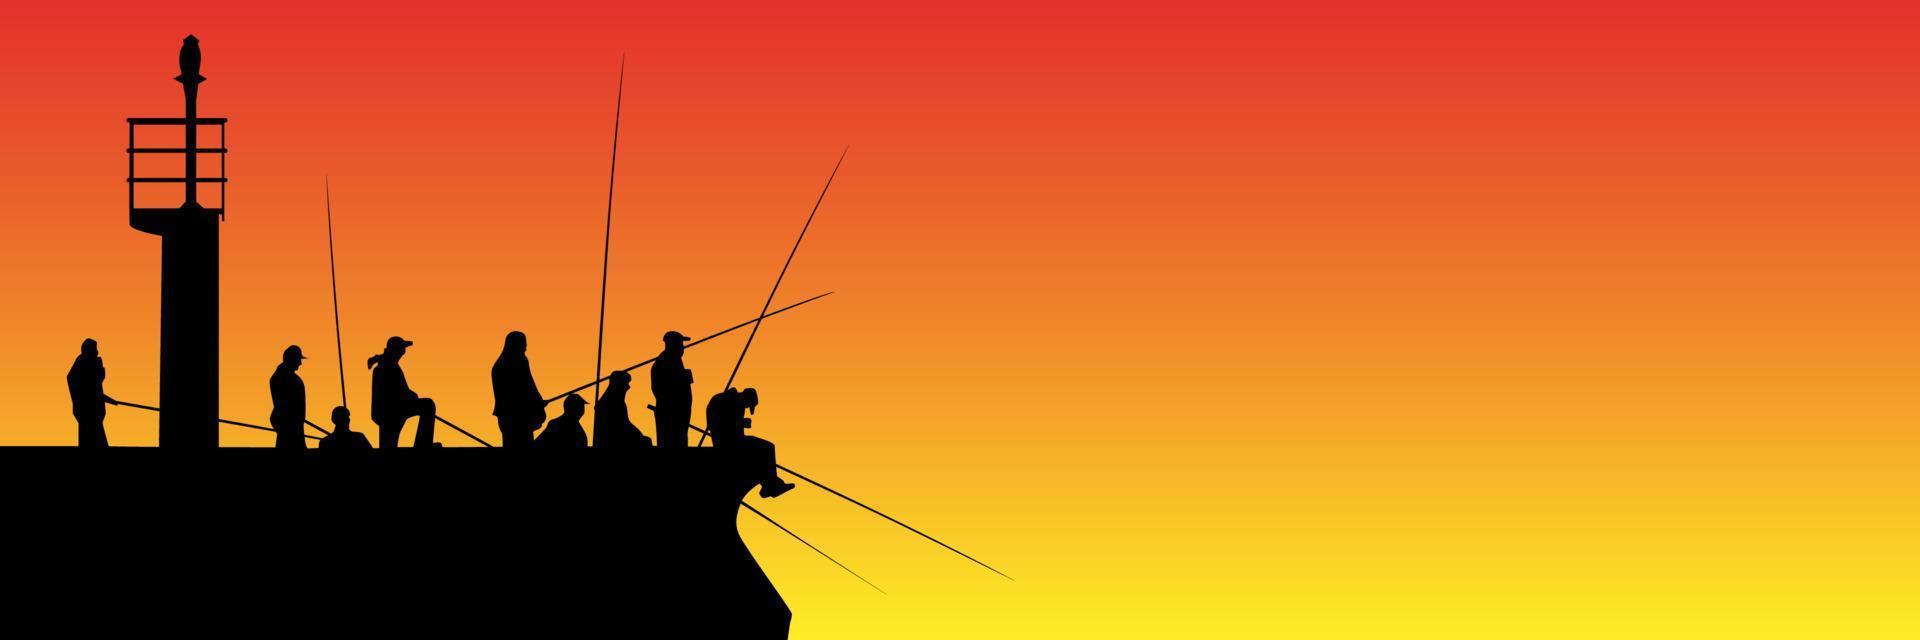 Silhouettes of fishermen with fishing rods on pier with lighthouse against the sunset. Lots of people with long fishing rods with copy space. vector